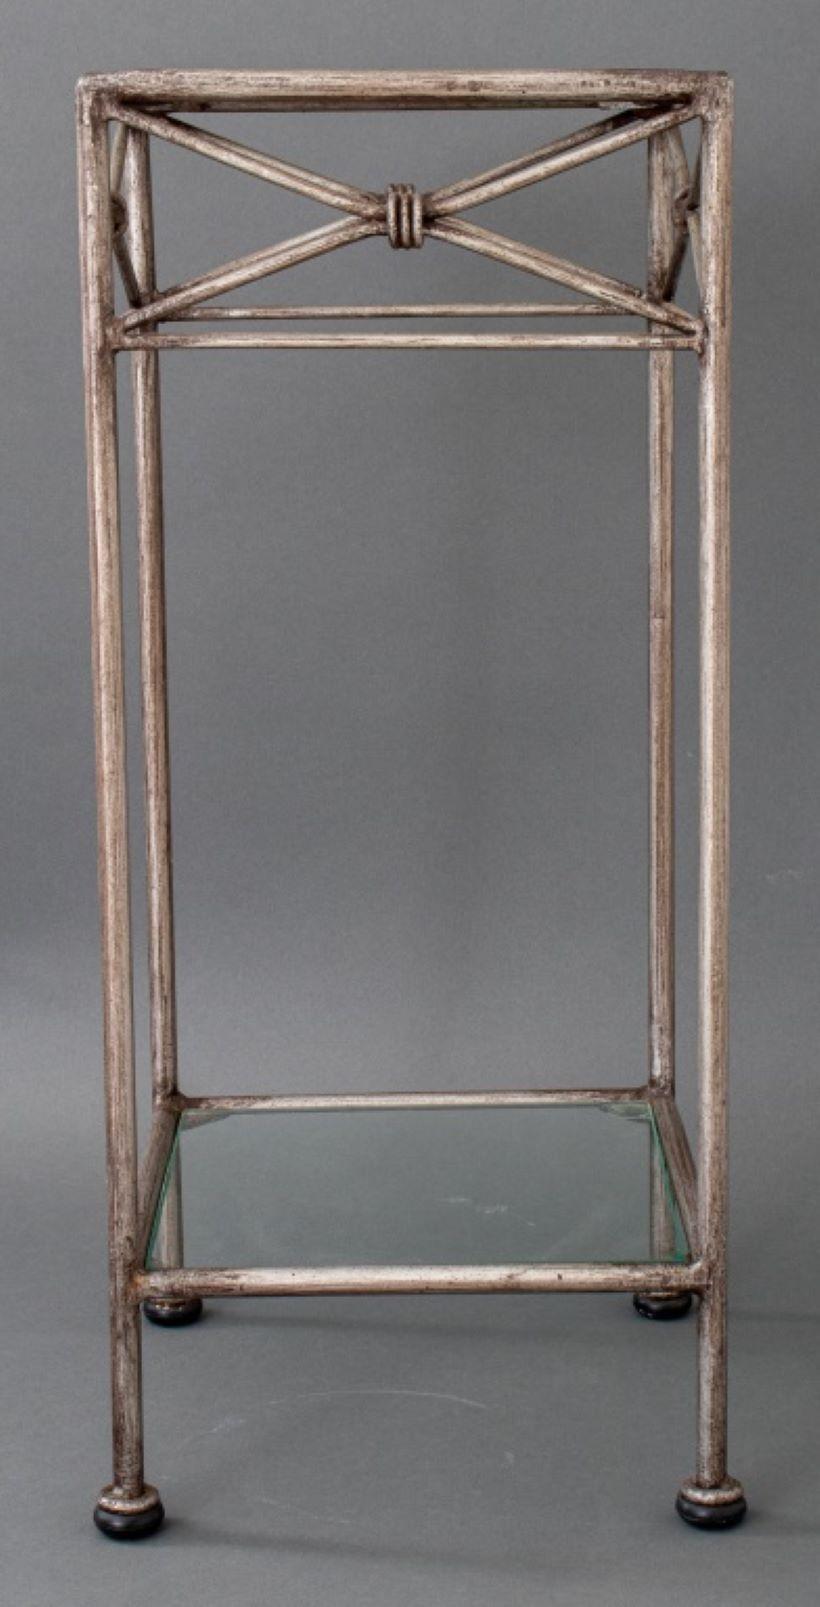 Modernist glass mounted silvered metal side table with a square top.

Dealer: S138XX